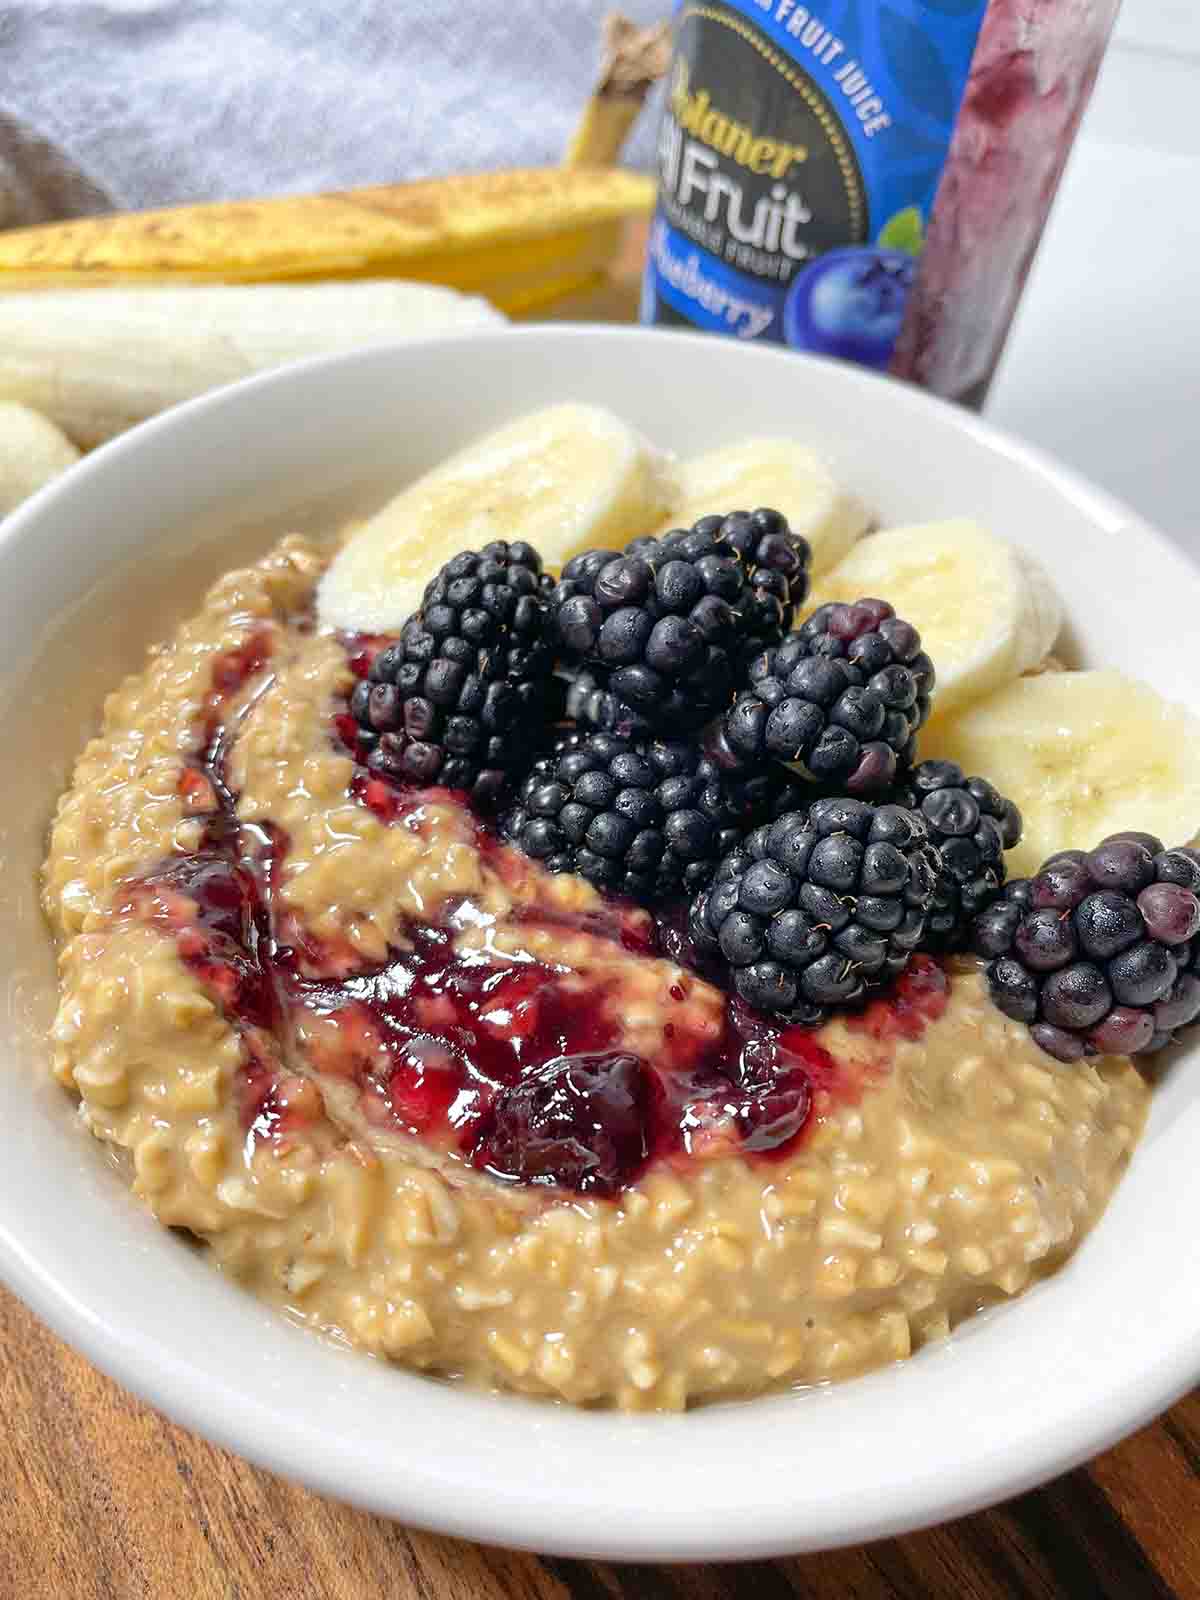 Peanut Butter & Jelly Banana Overnight Oats with banana, blackberries, and jelly in a white bowl